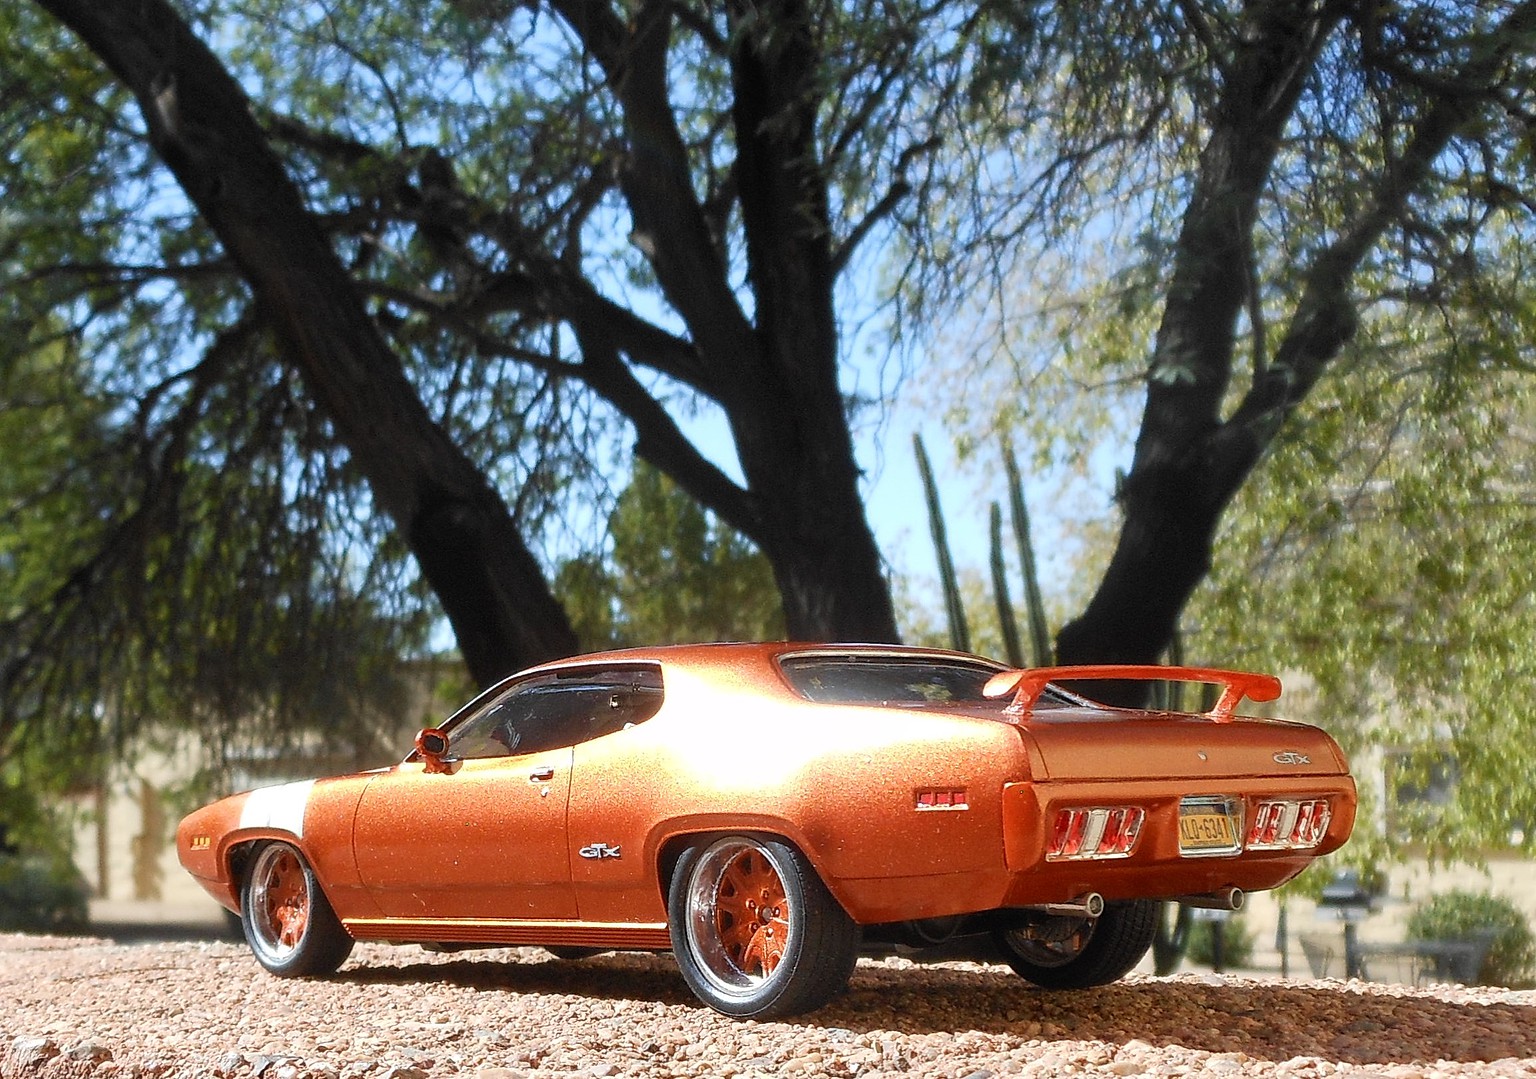 Revell Fast & Furious - Dominic's 1971 Plymouth GTX (07692) au